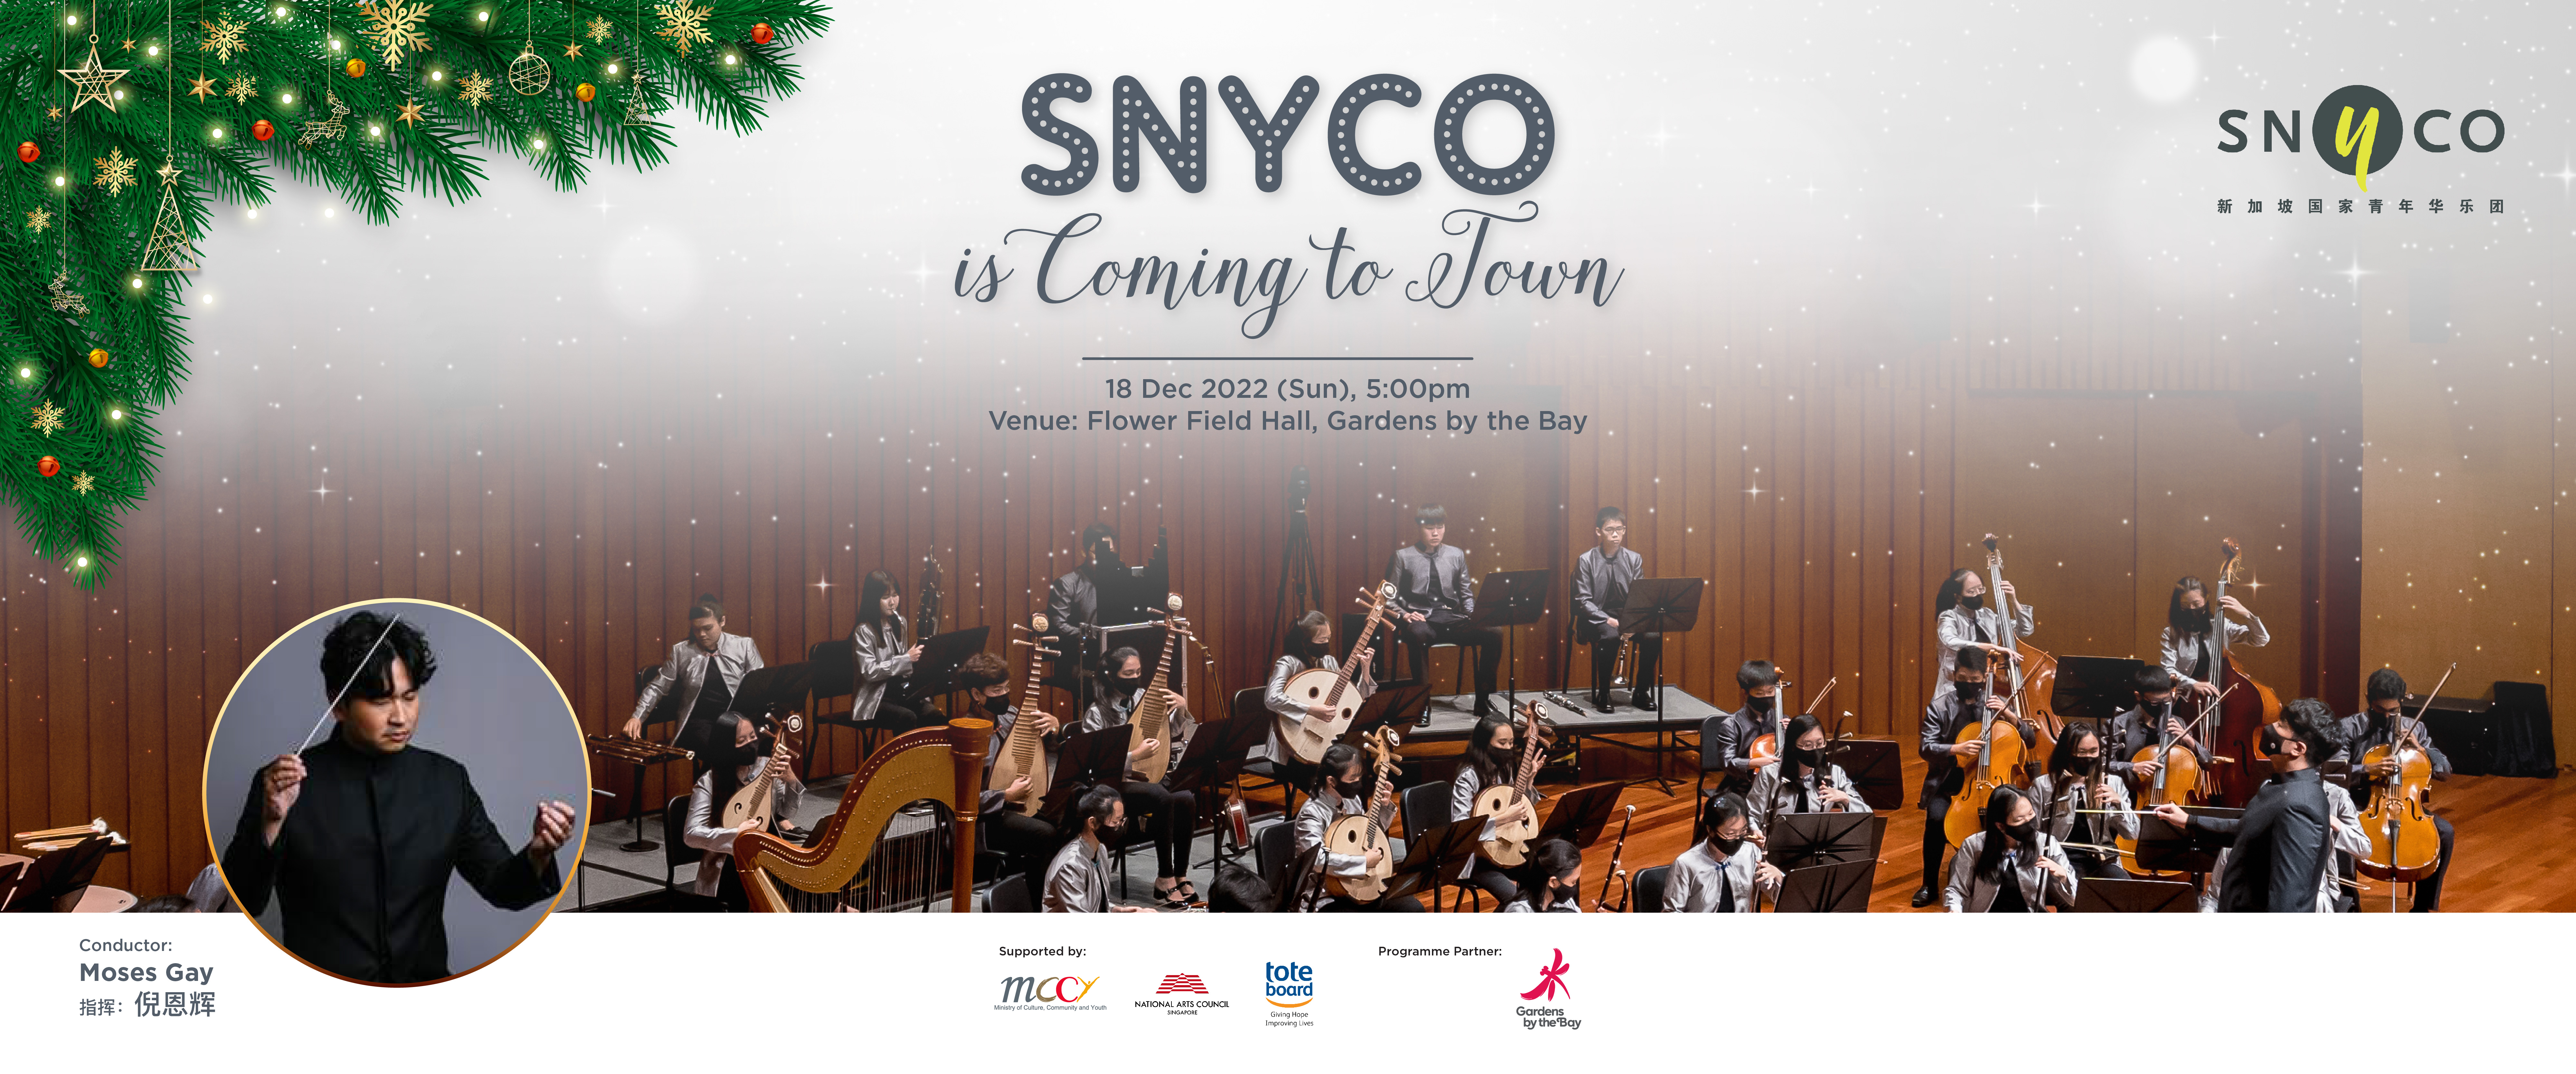 SNYCO_Outreach_1920x800-01_2 SNYCO is Coming to Town 